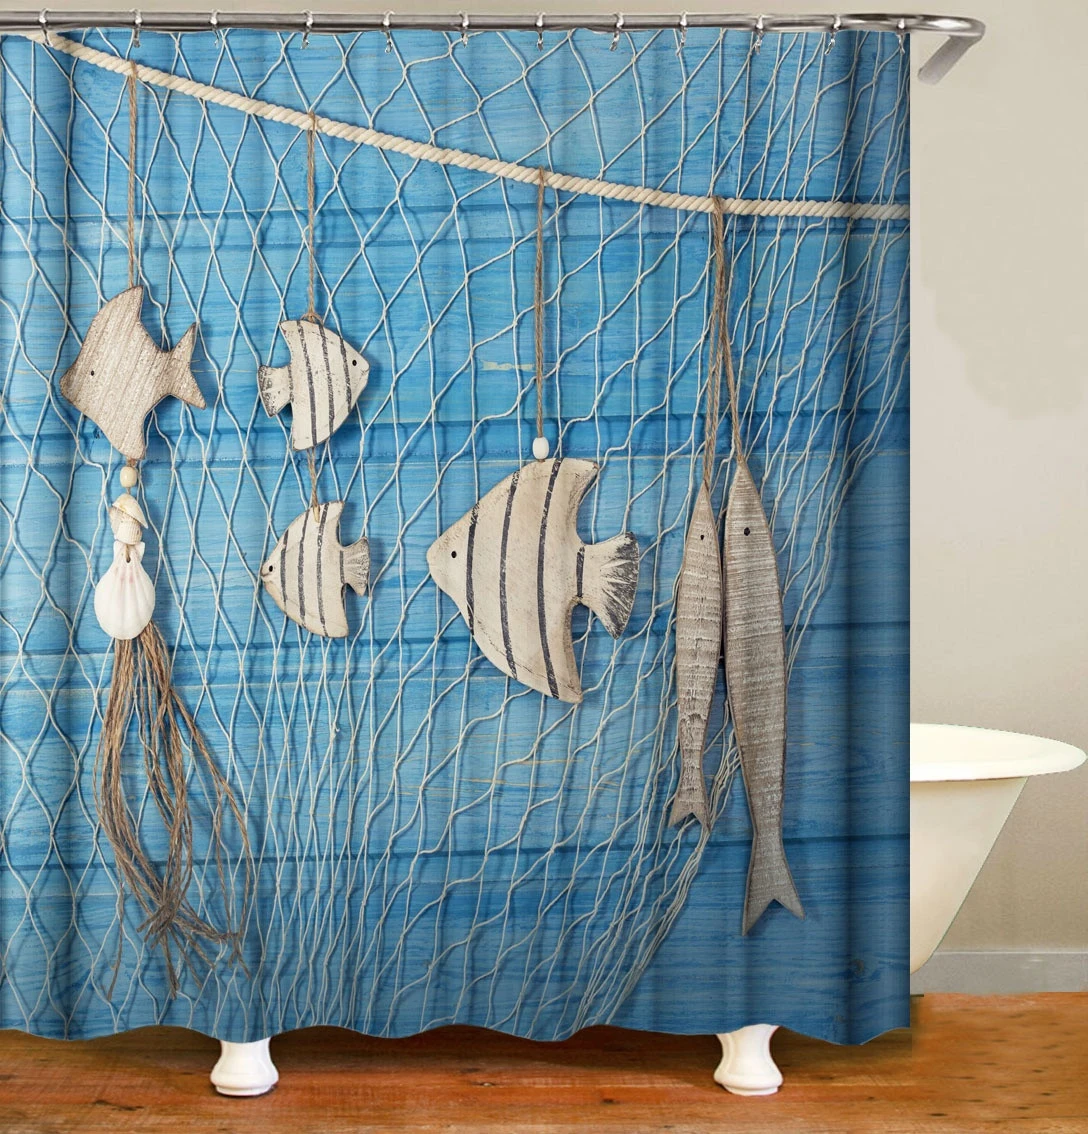 i@home in stock shark textile shower curtain polyester waterproof bath curtains